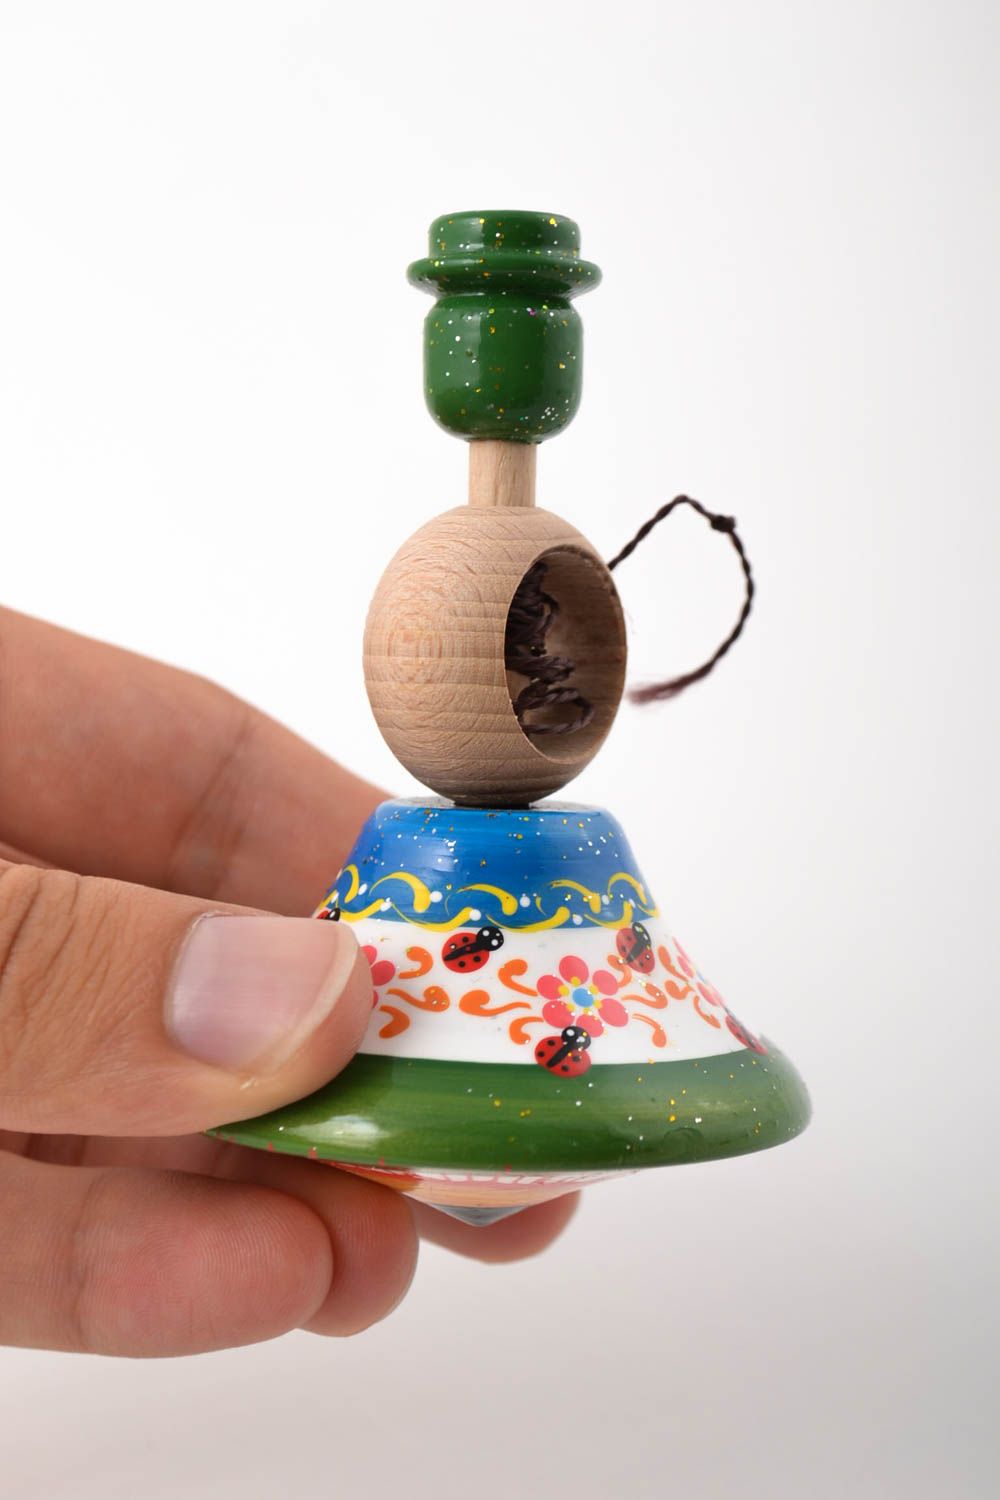 Handmade spin toy top spinning top toys vintage toys gifts for children photo 6